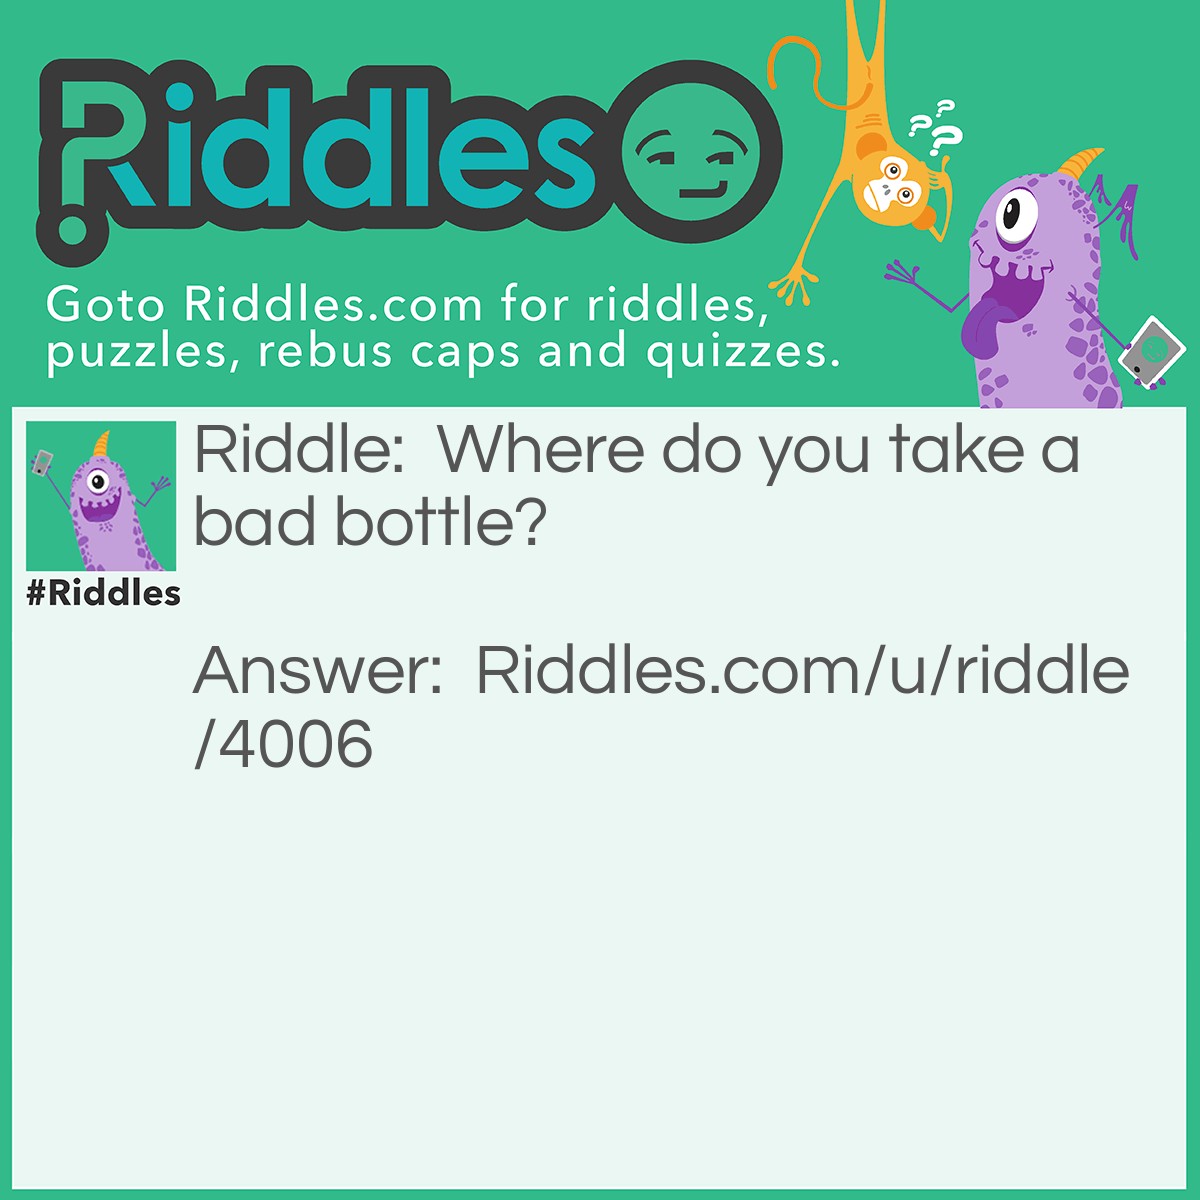 Riddle: Where do you take a bad bottle? Answer: To the caps! (cops).